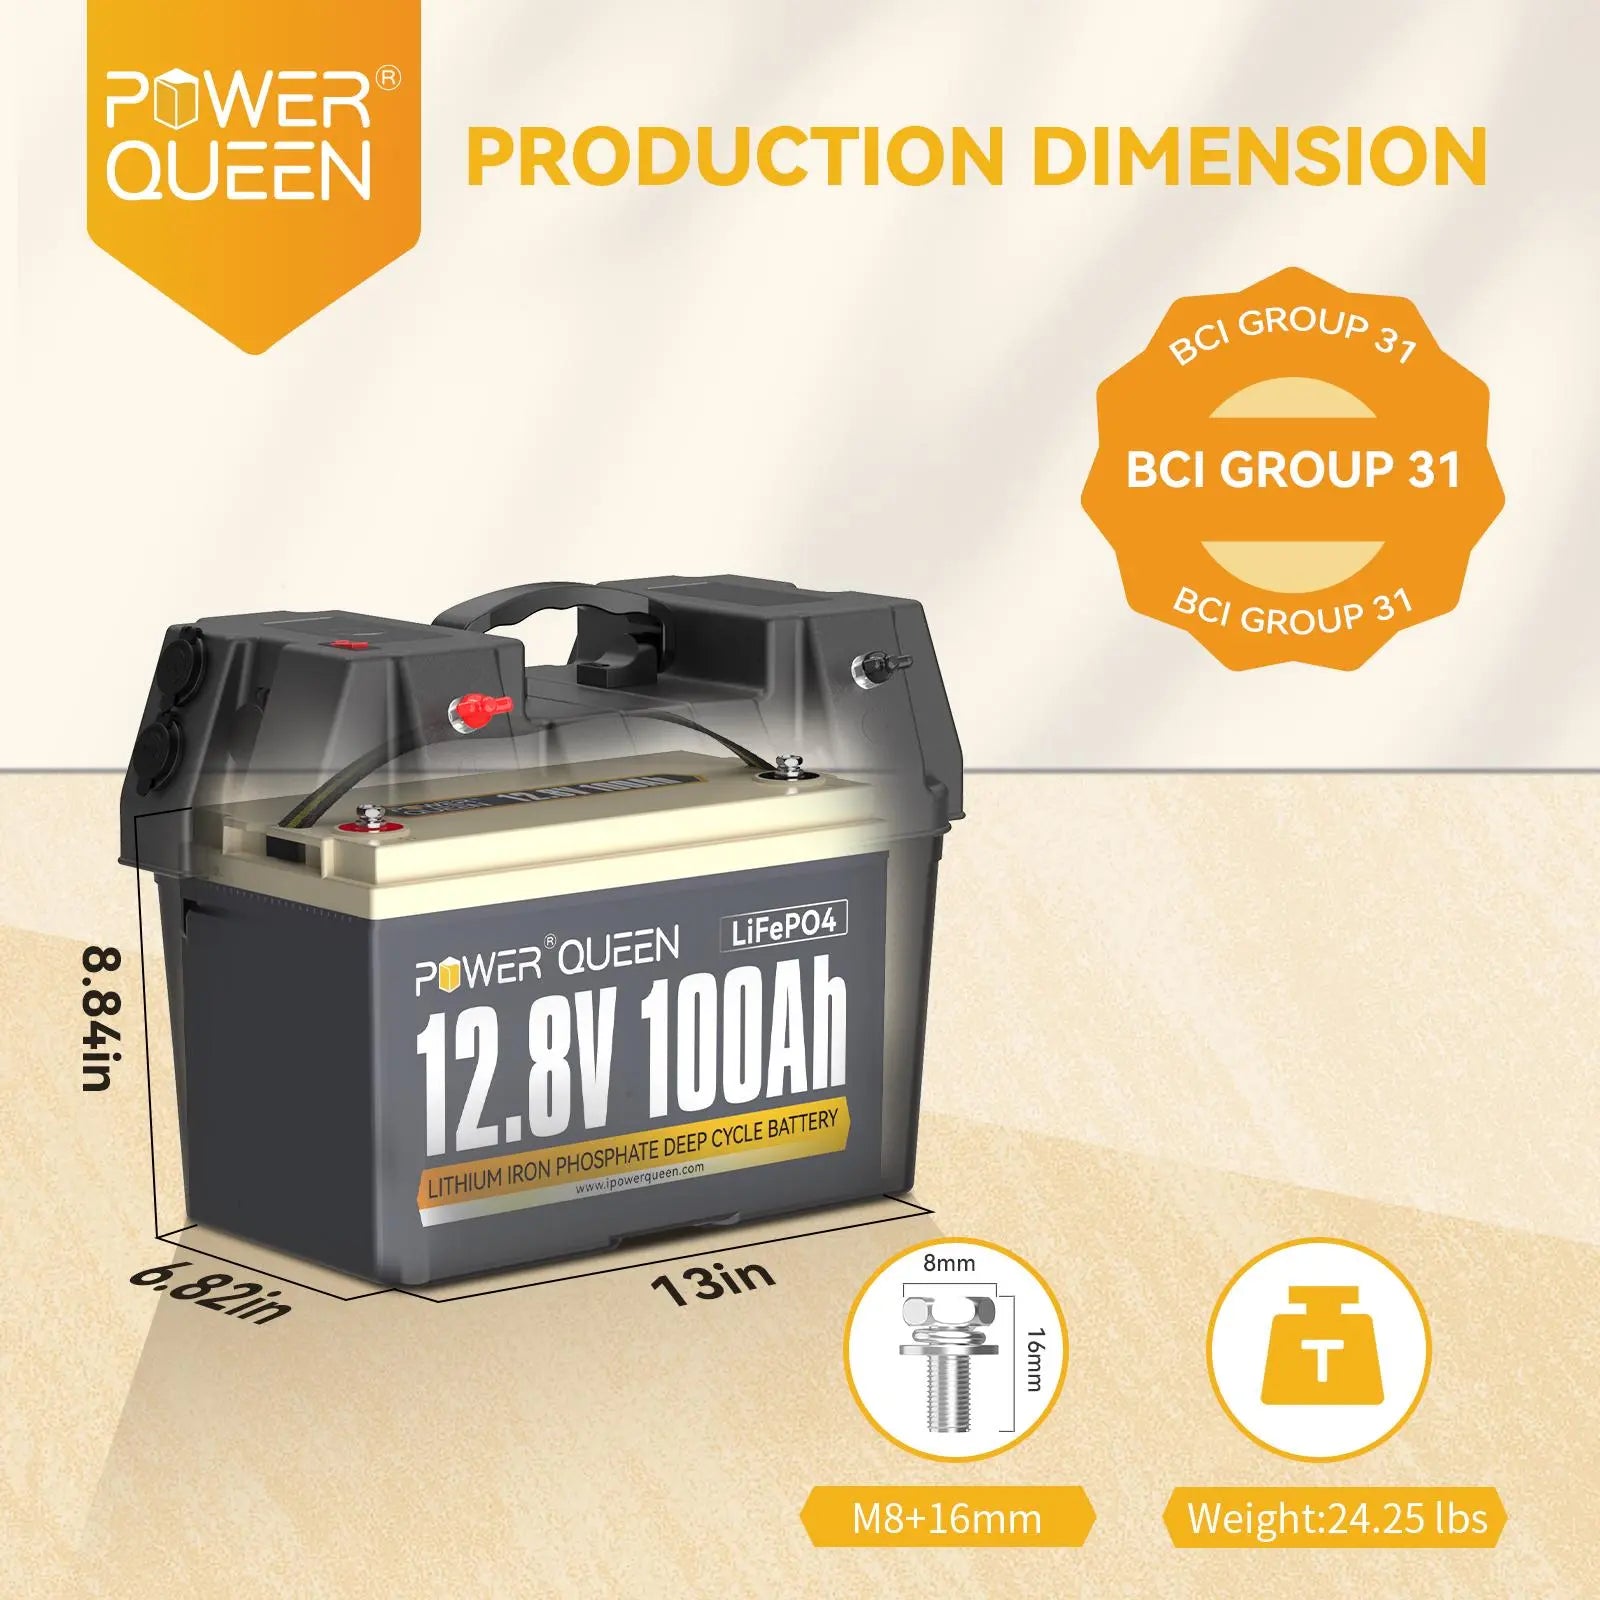 the dimension of Power Queen 12V 100Ah Deep Cycle Lithium Battery